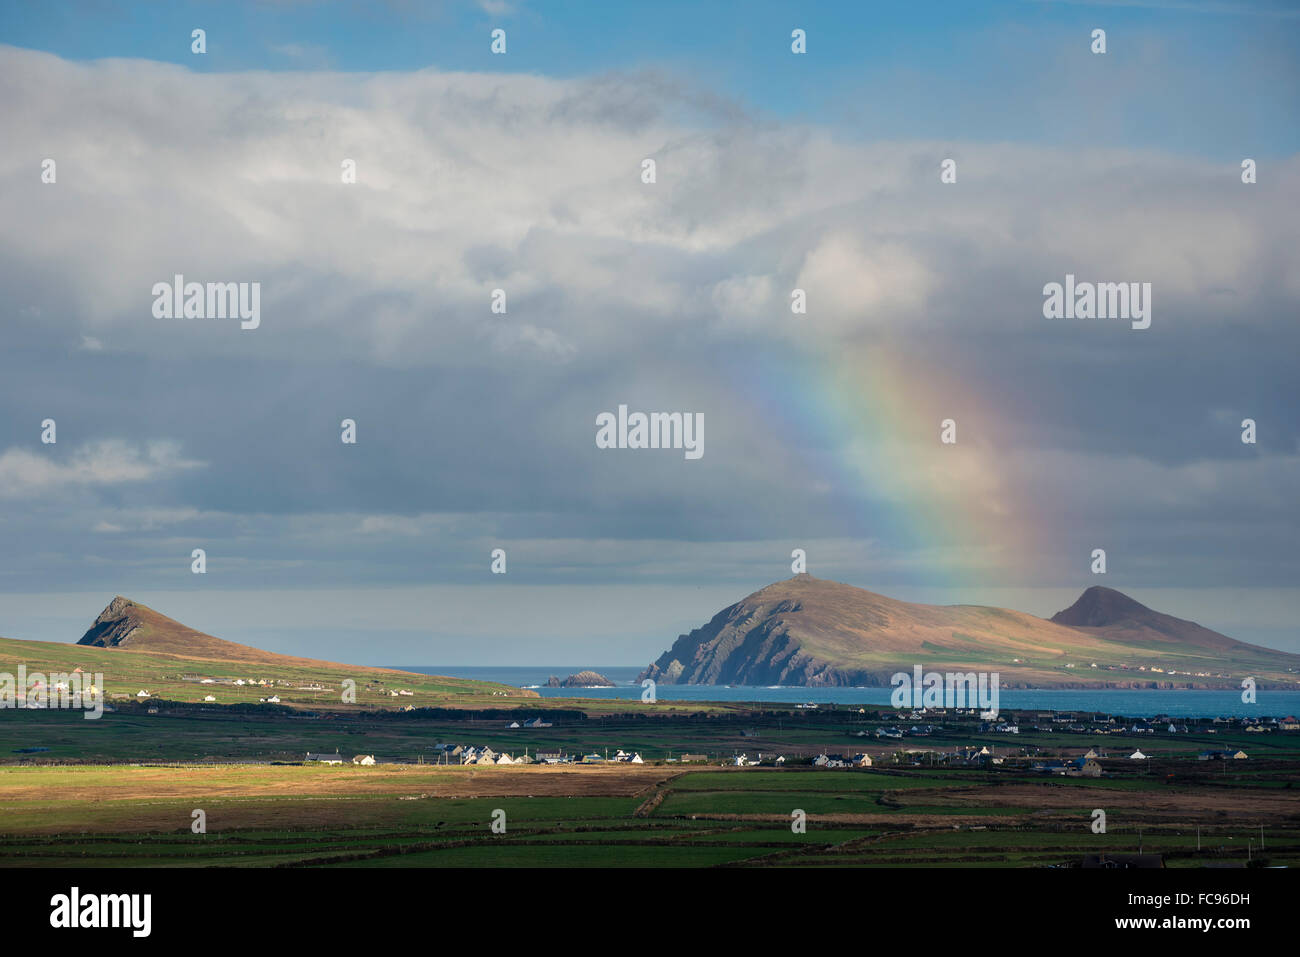 Rainbow over hills and dwellings, looking towards Clogher and Rosroe, Dingle Peninsula, County Kerry, Munster, Republic of Irela Stock Photo